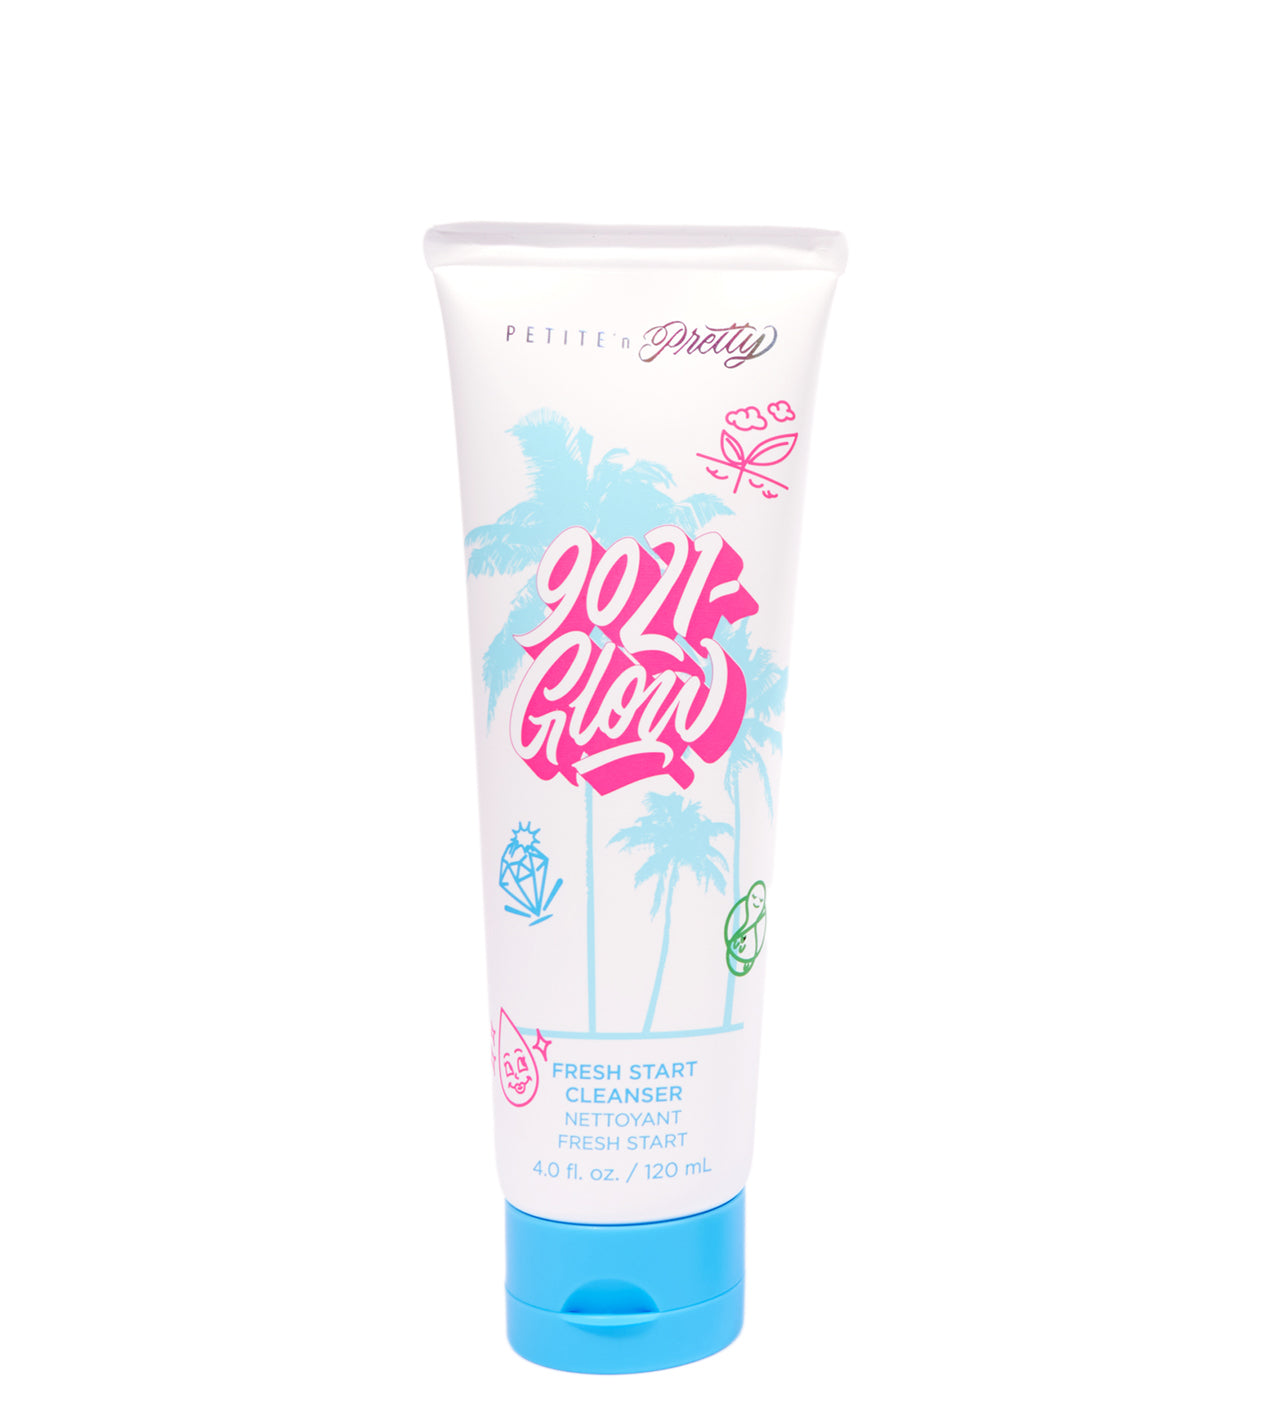 9021-GLOW! Fresh Start Cleanser - Petite 'n Pretty - A beauty brand leading  the Sparkle Revolution!